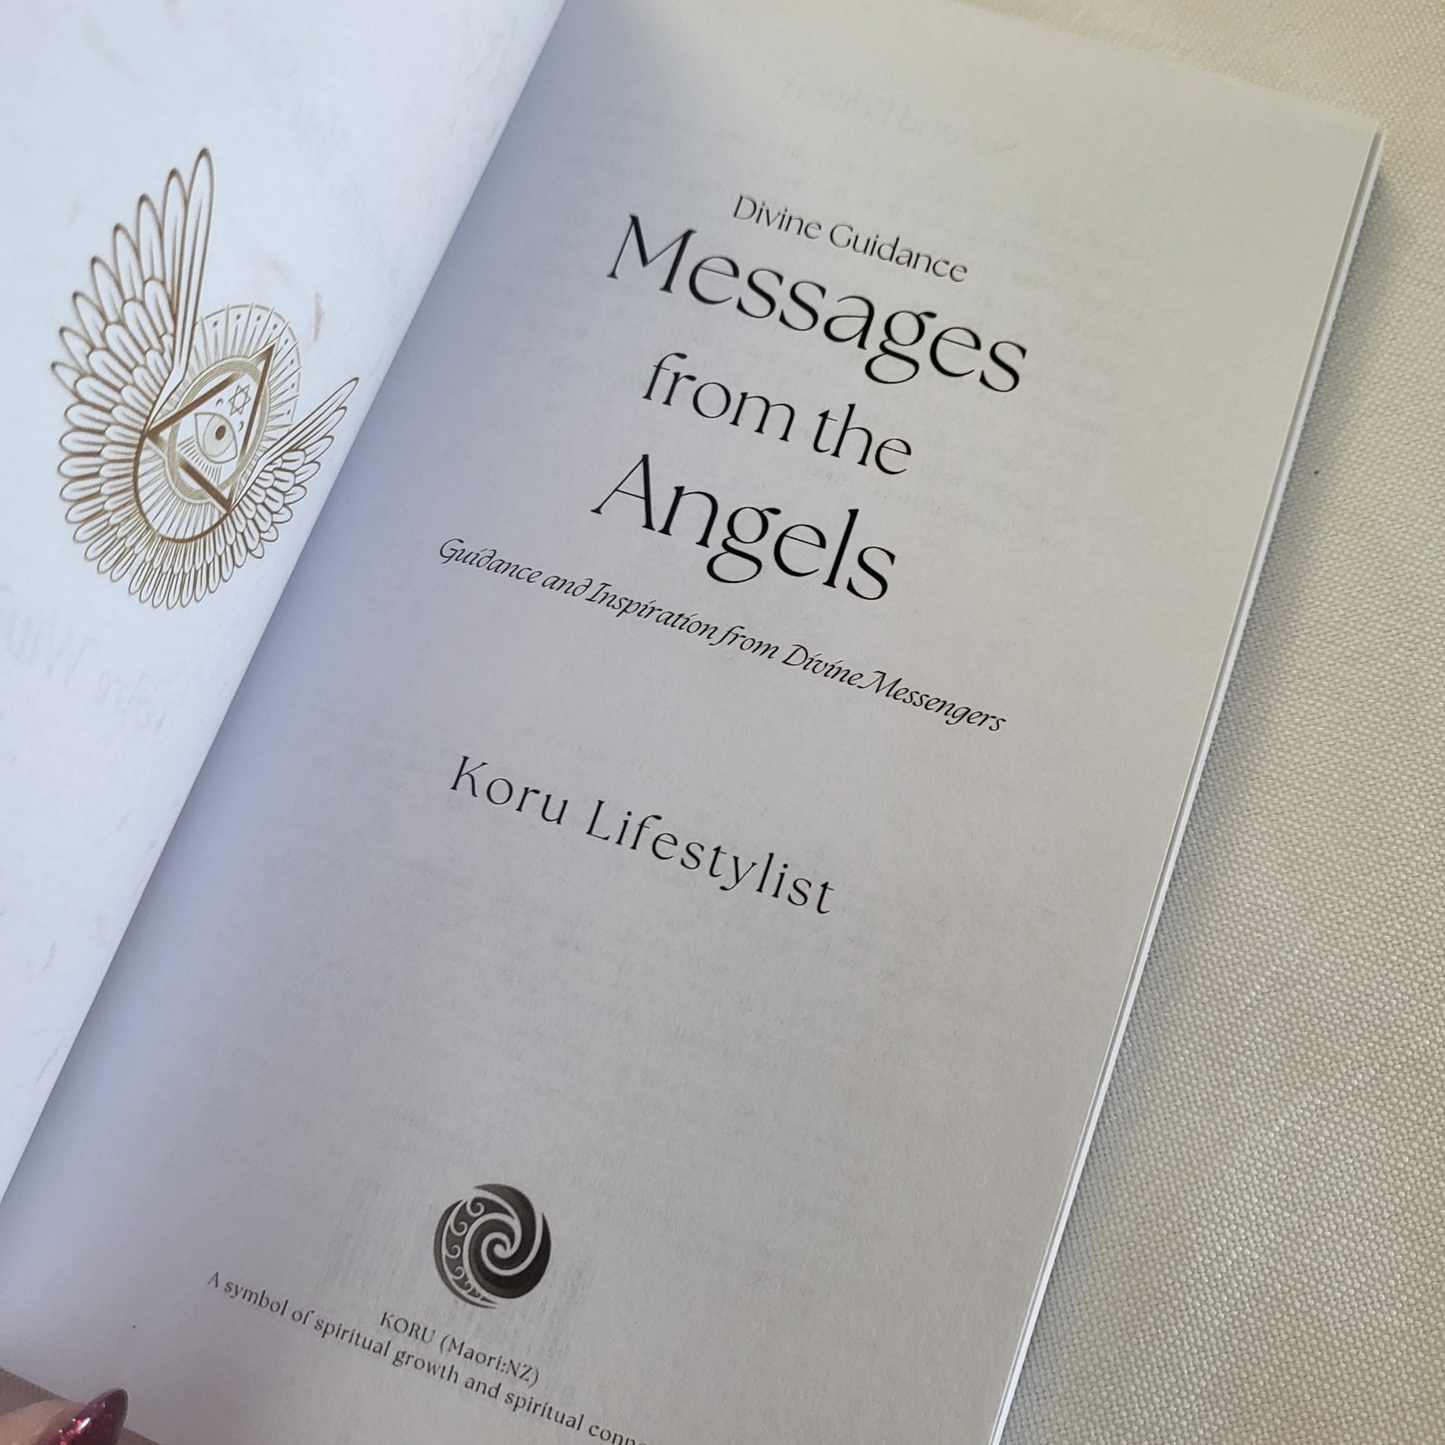 Divine Guidance: Messages from the Angels - 1st Edition